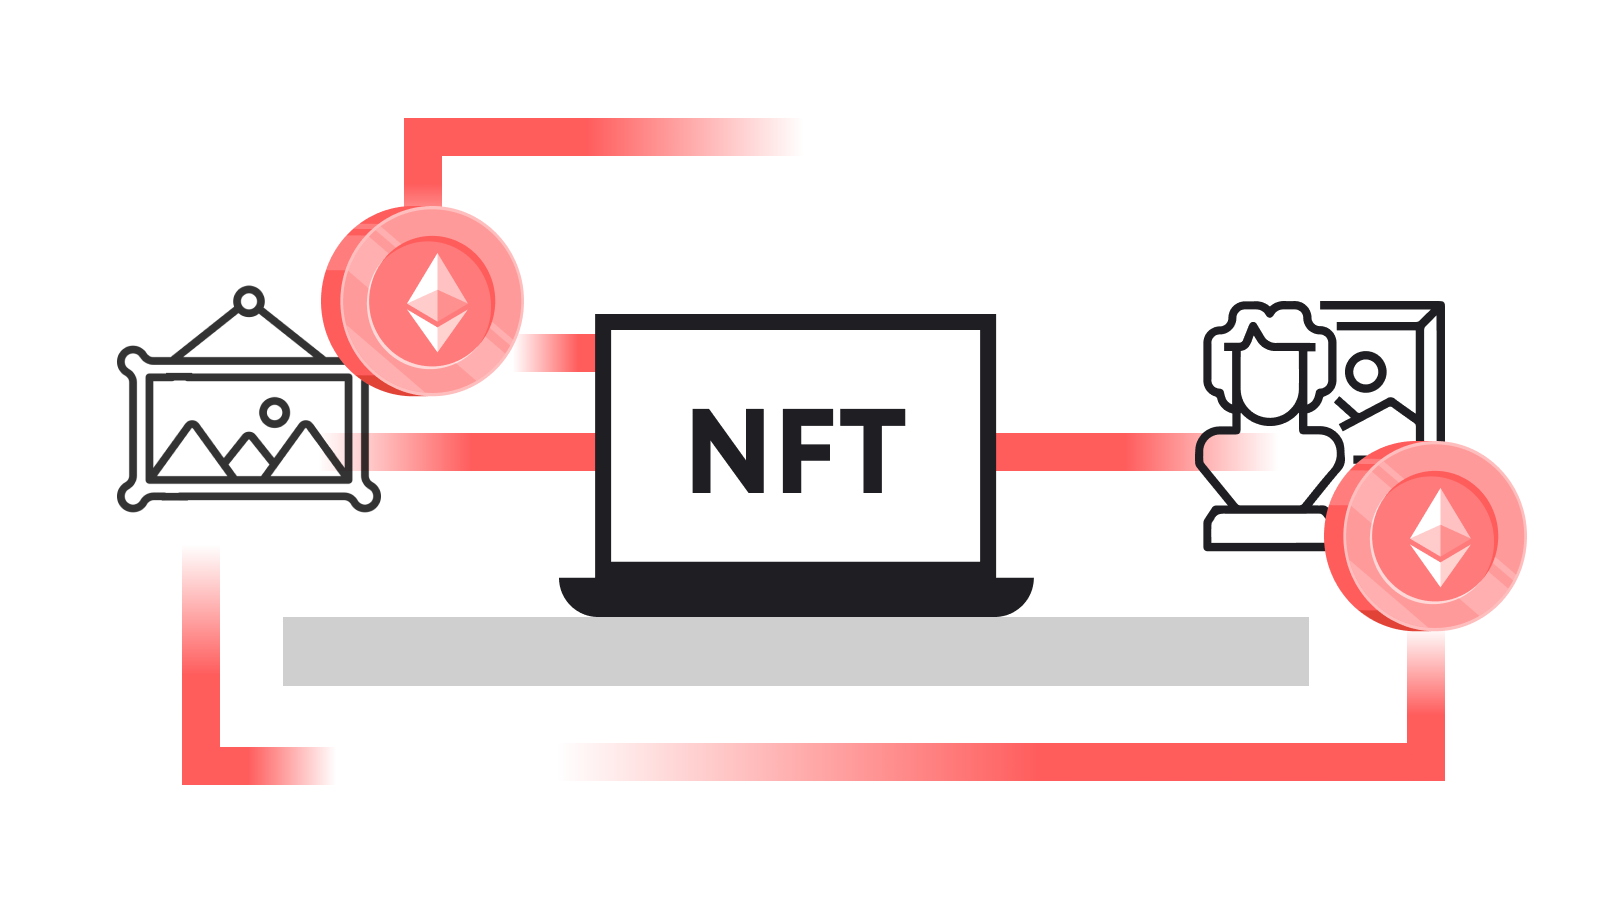 There are several essential technical aspects of creating a successful and secure NFT digital art marketplace